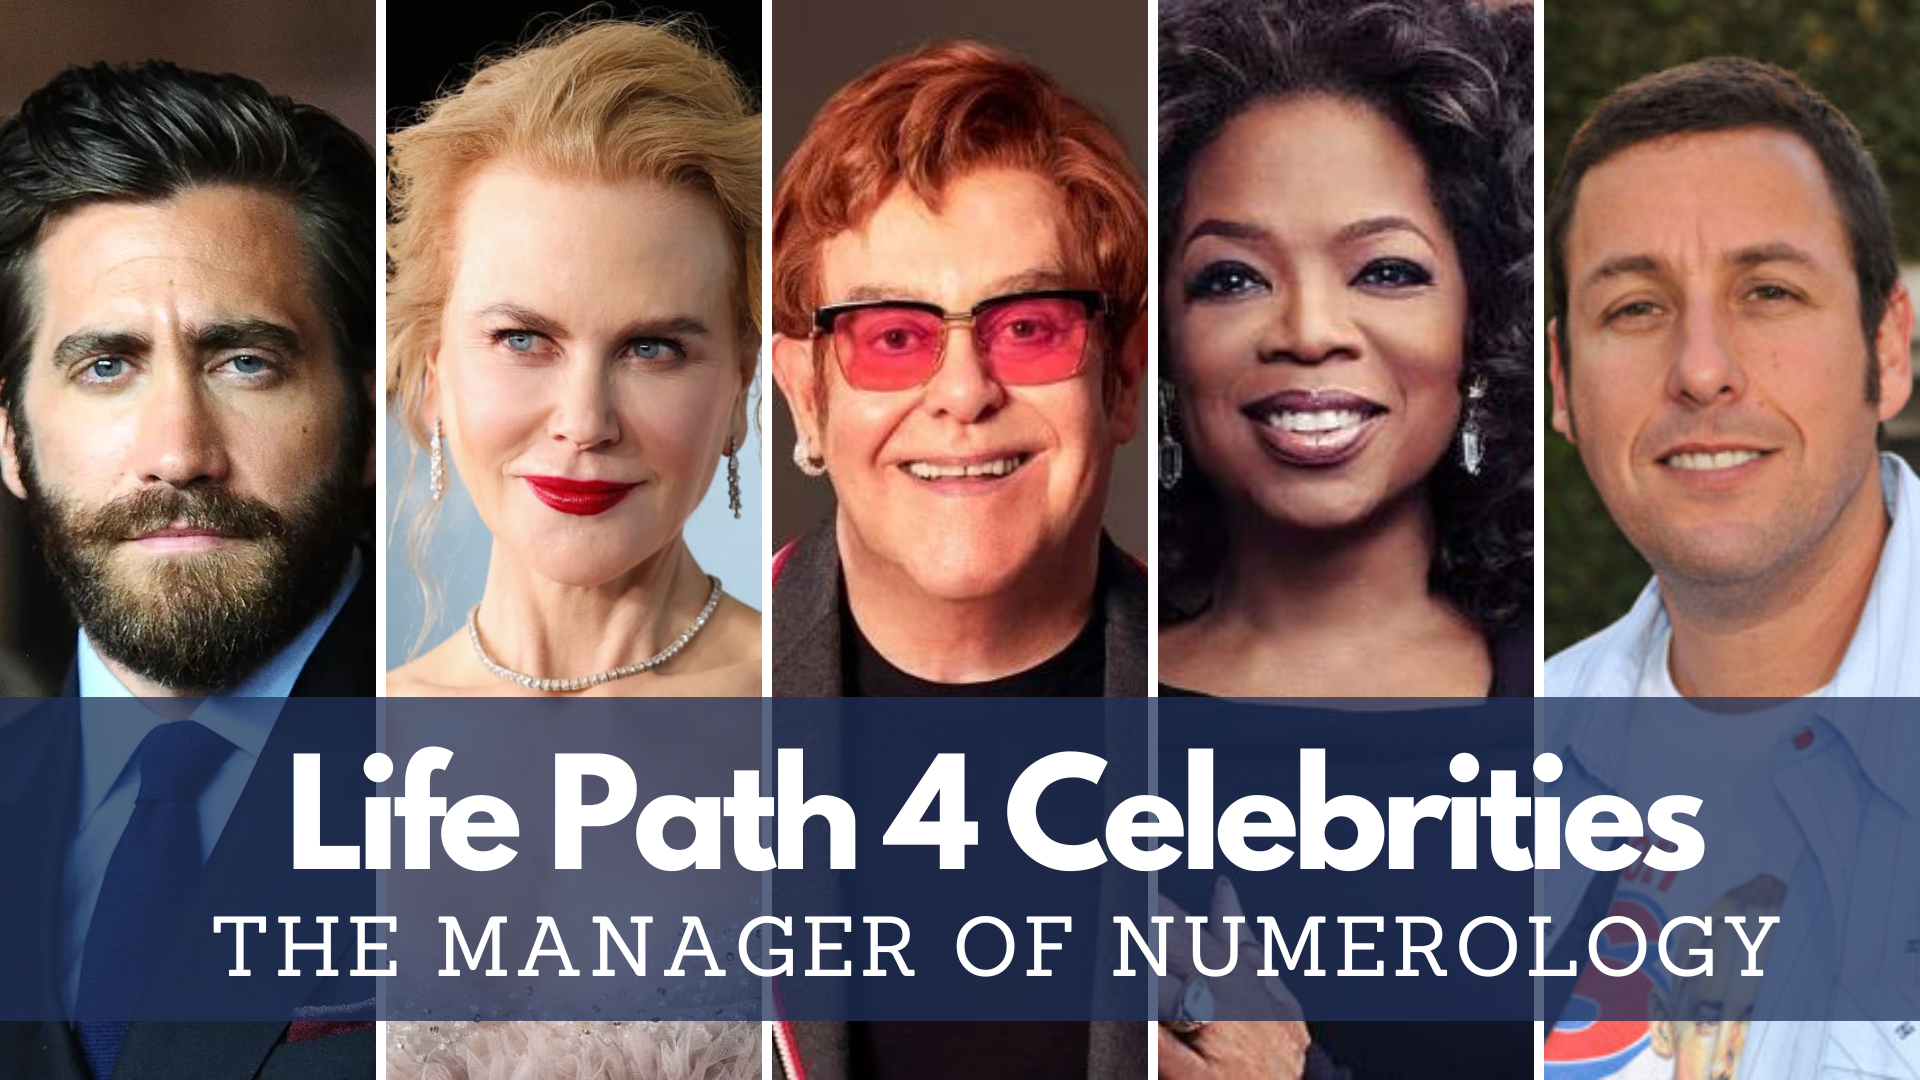 Life Path 4 Celebrities - The Manager Of Numerology